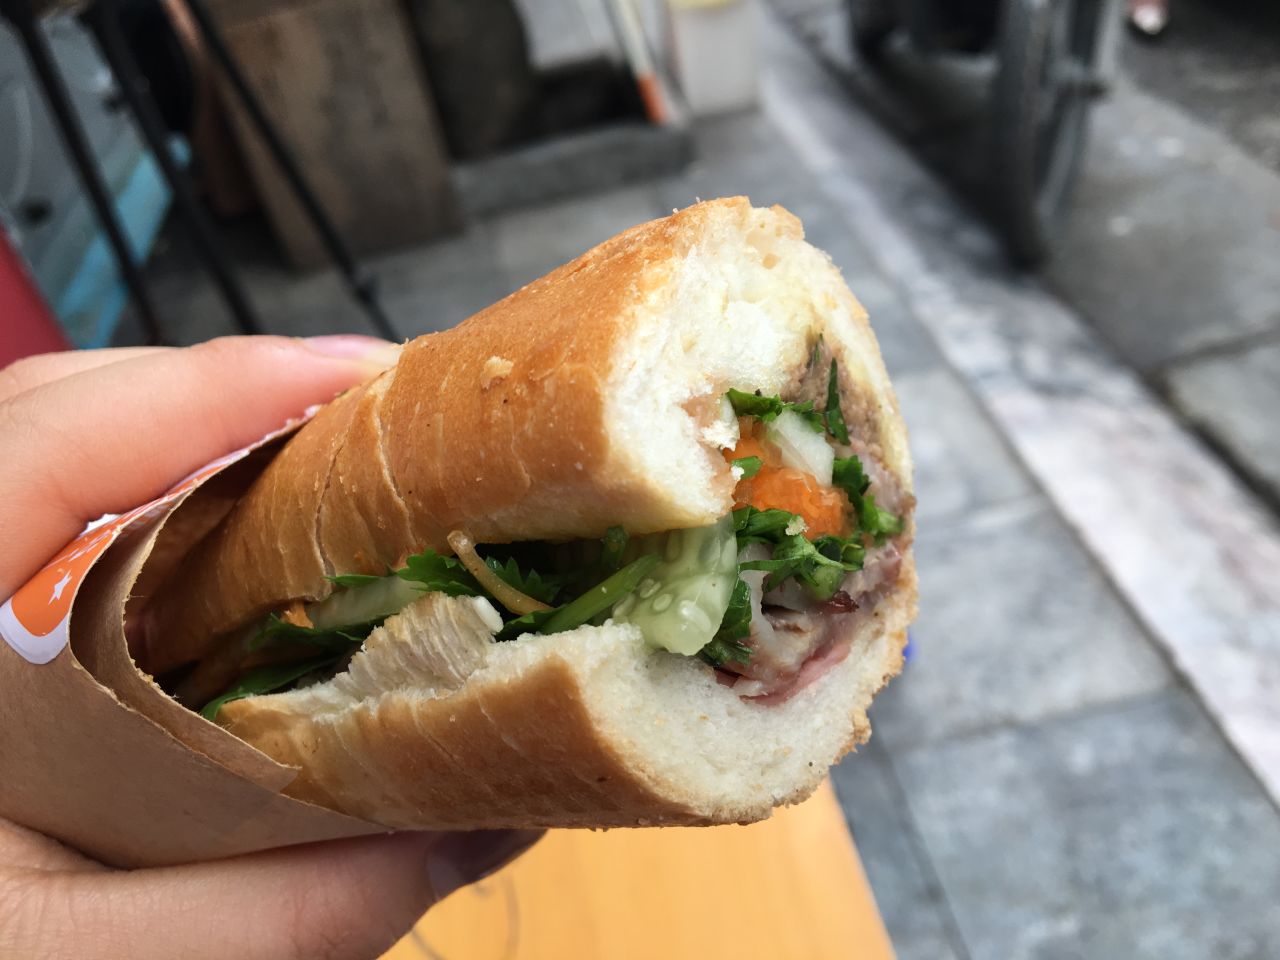 Banh mi is one of Vietnam's most famous exports. Arriving in a crispy, fresh baguette, fillings can include pickled veggies, cilantro, pork, pate, sausage and even cheese. 